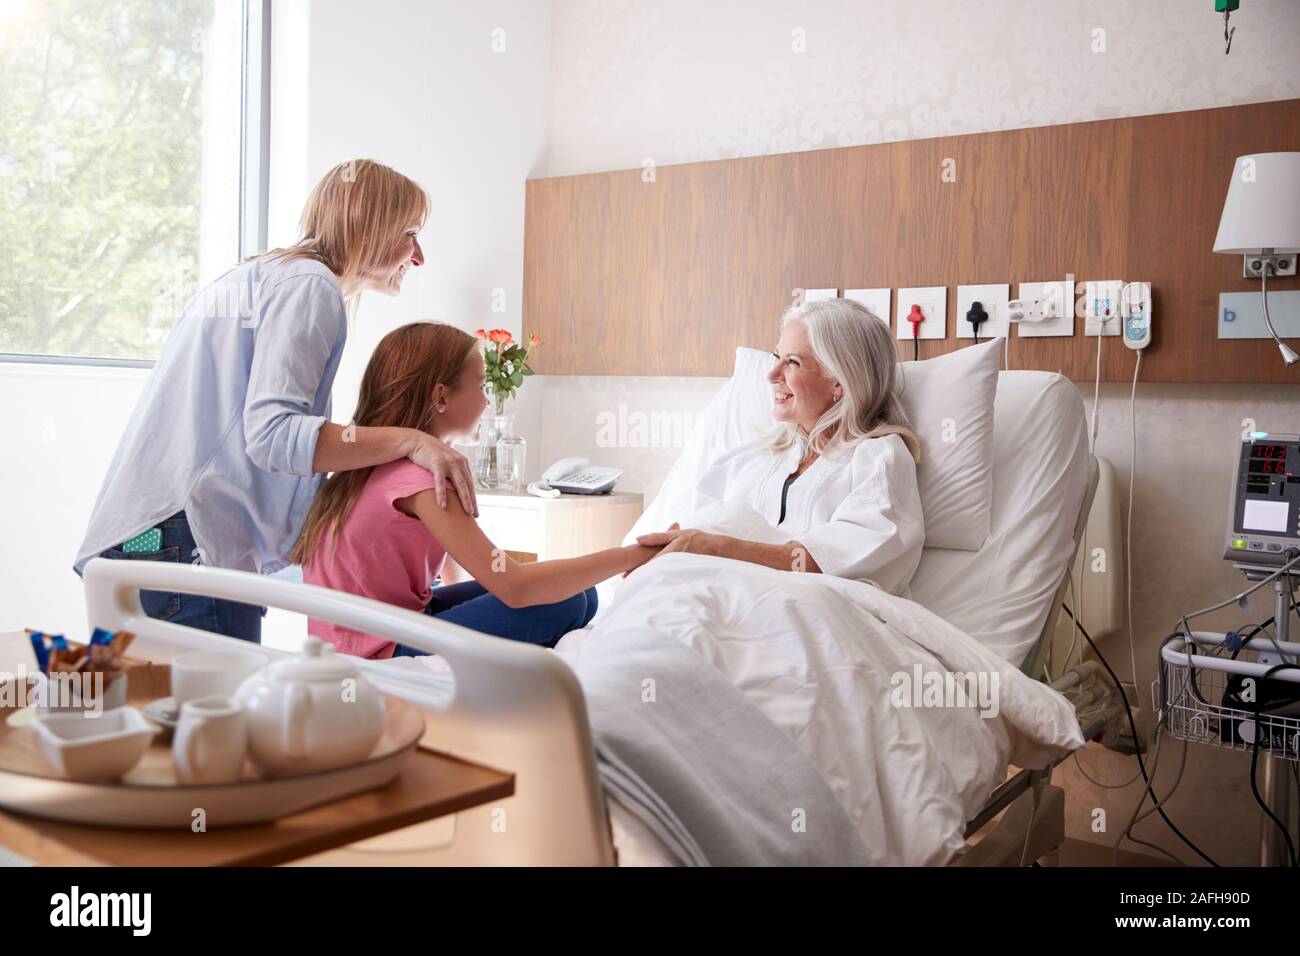 Granddaughter Talking With Grandmother On Family Hospital Visit Stock Photo